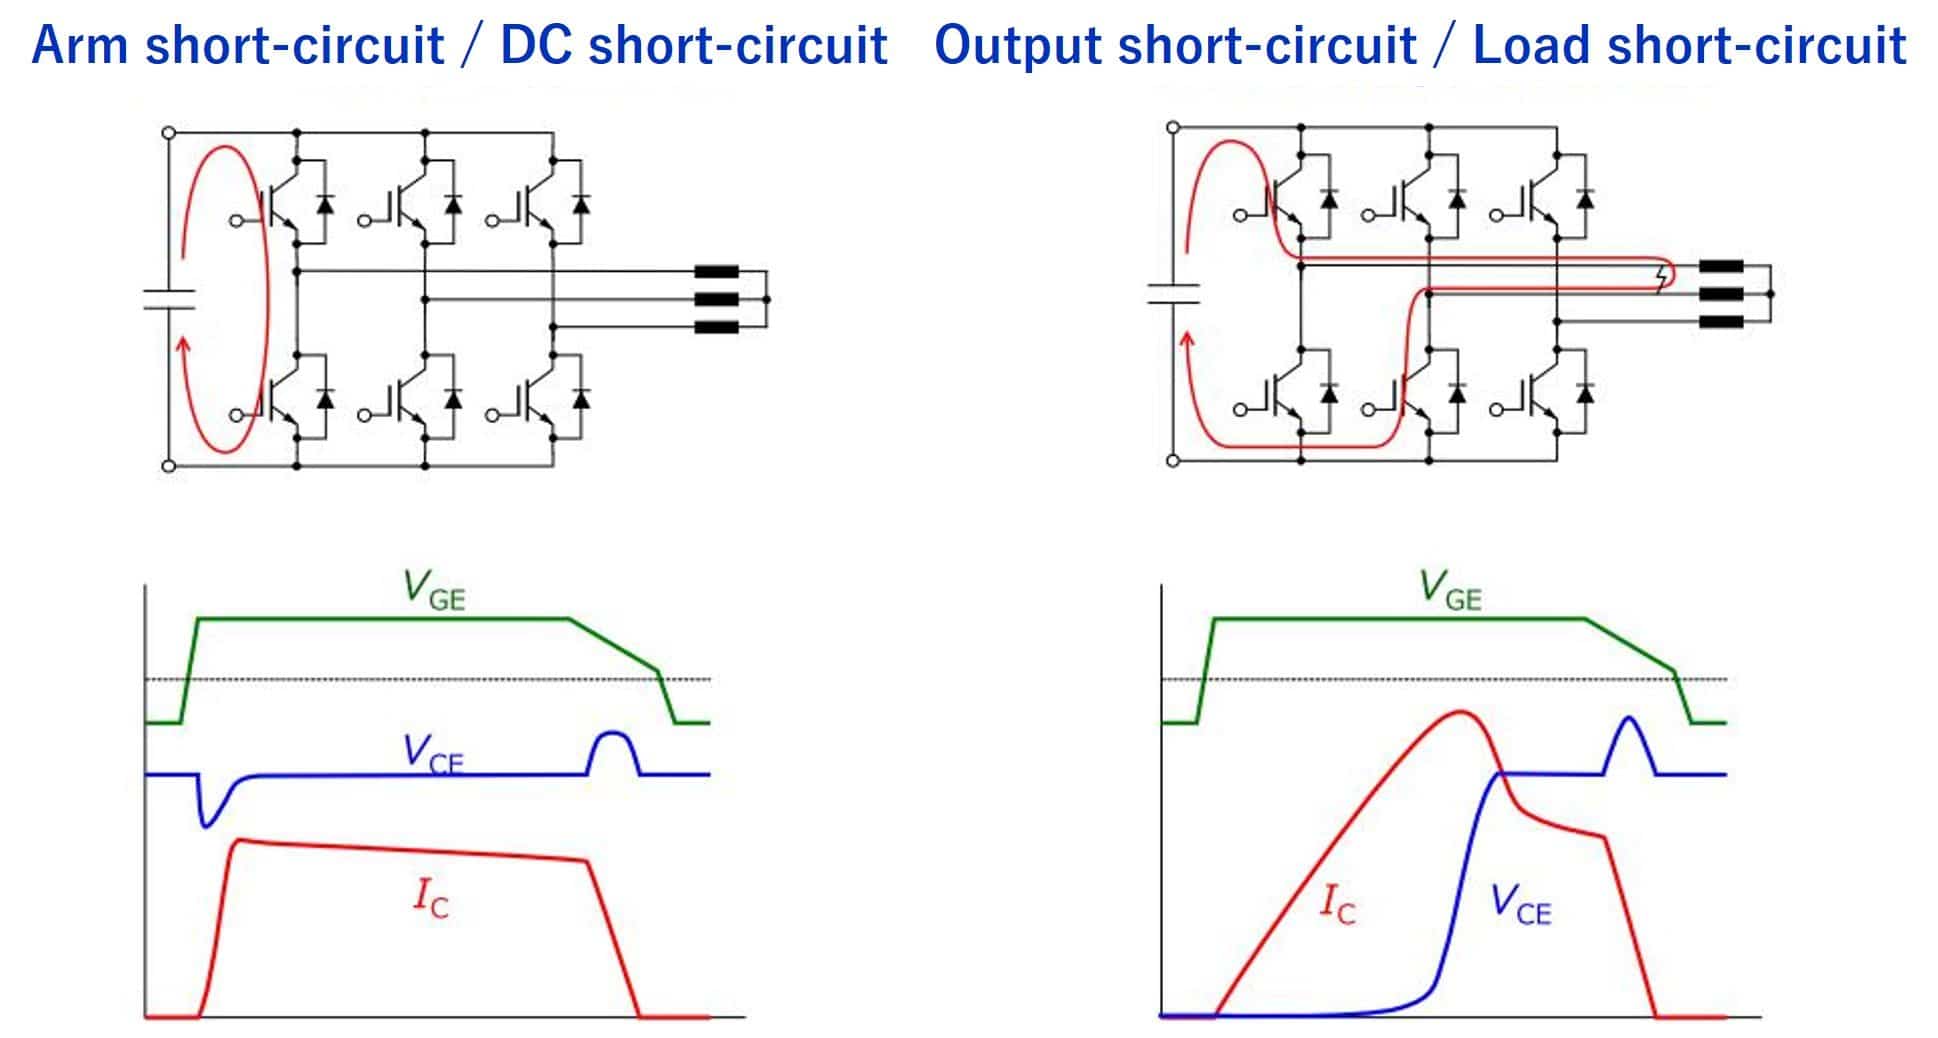 What is the difference between DC short circuit (arm short circuit